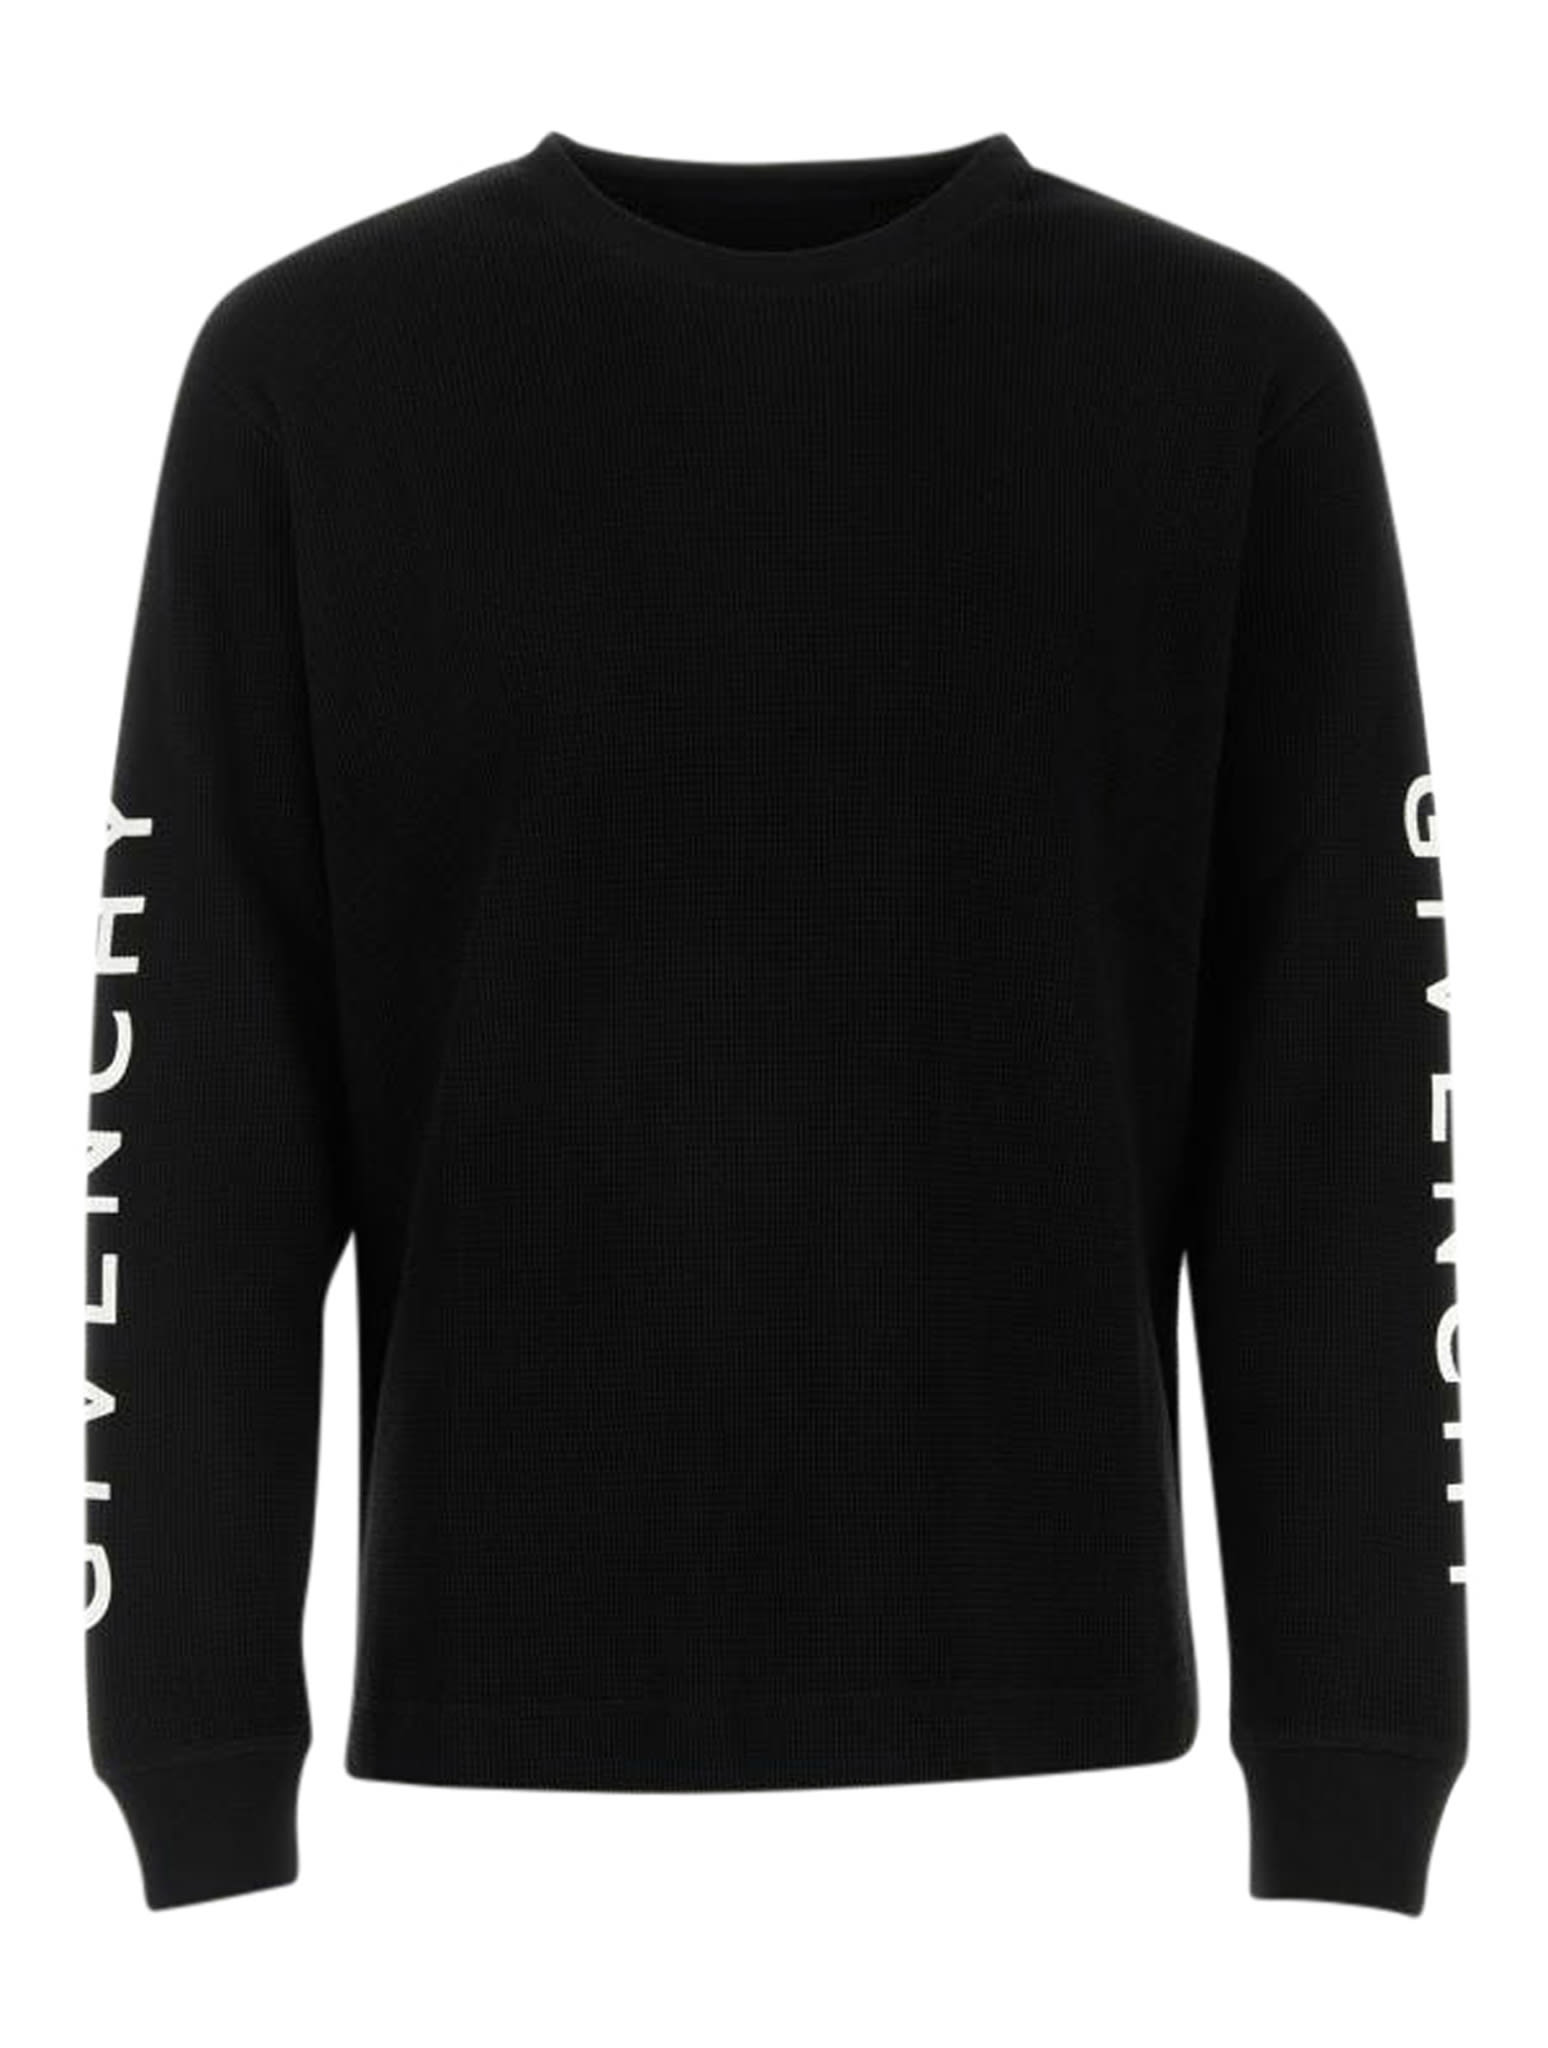 GIVENCHY CLASSIC FIT LONG SLEEVES T-SHIRT